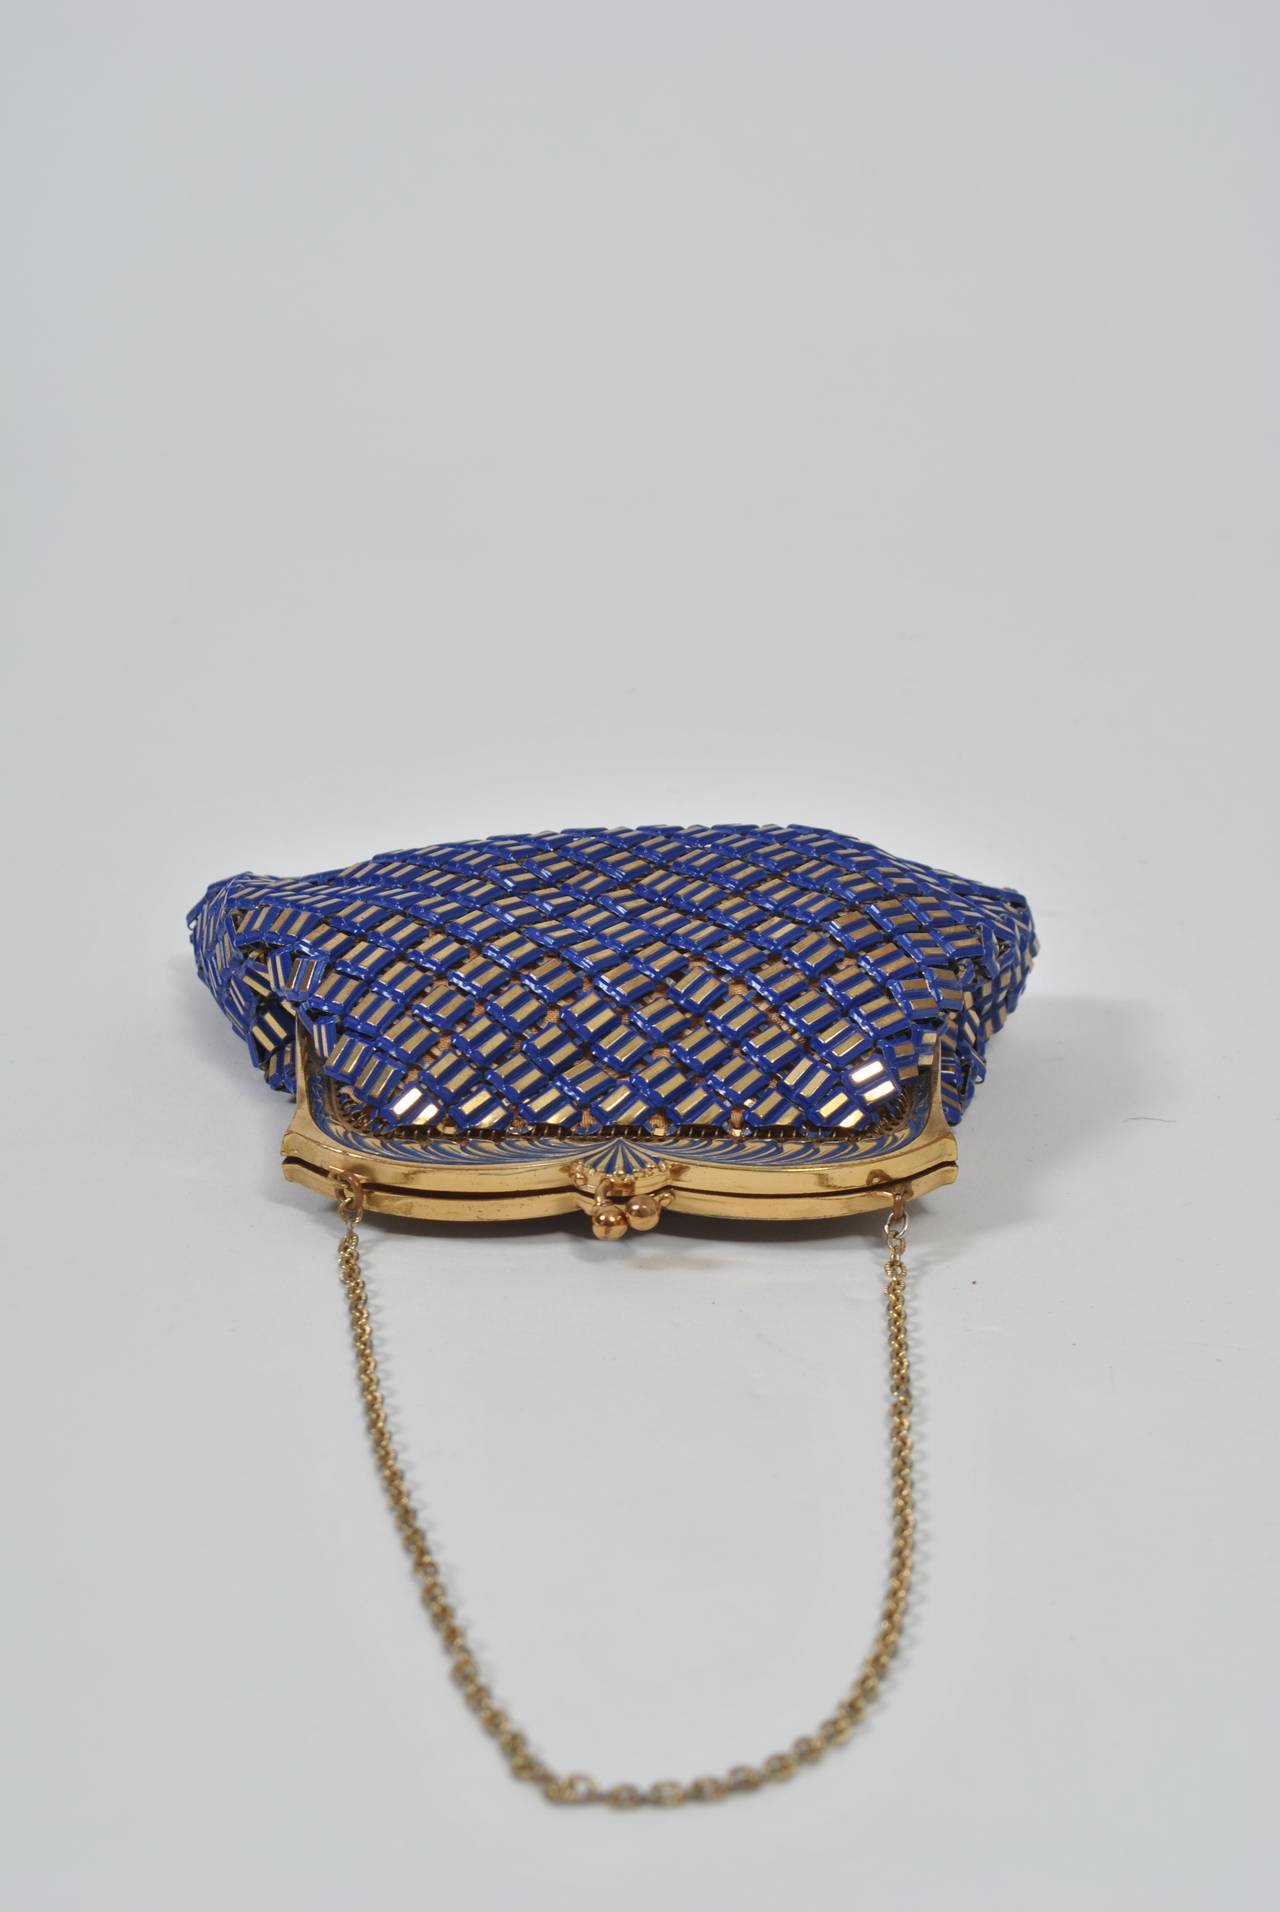 Whiting & Davis Blue and Gold Mesh Bag 2